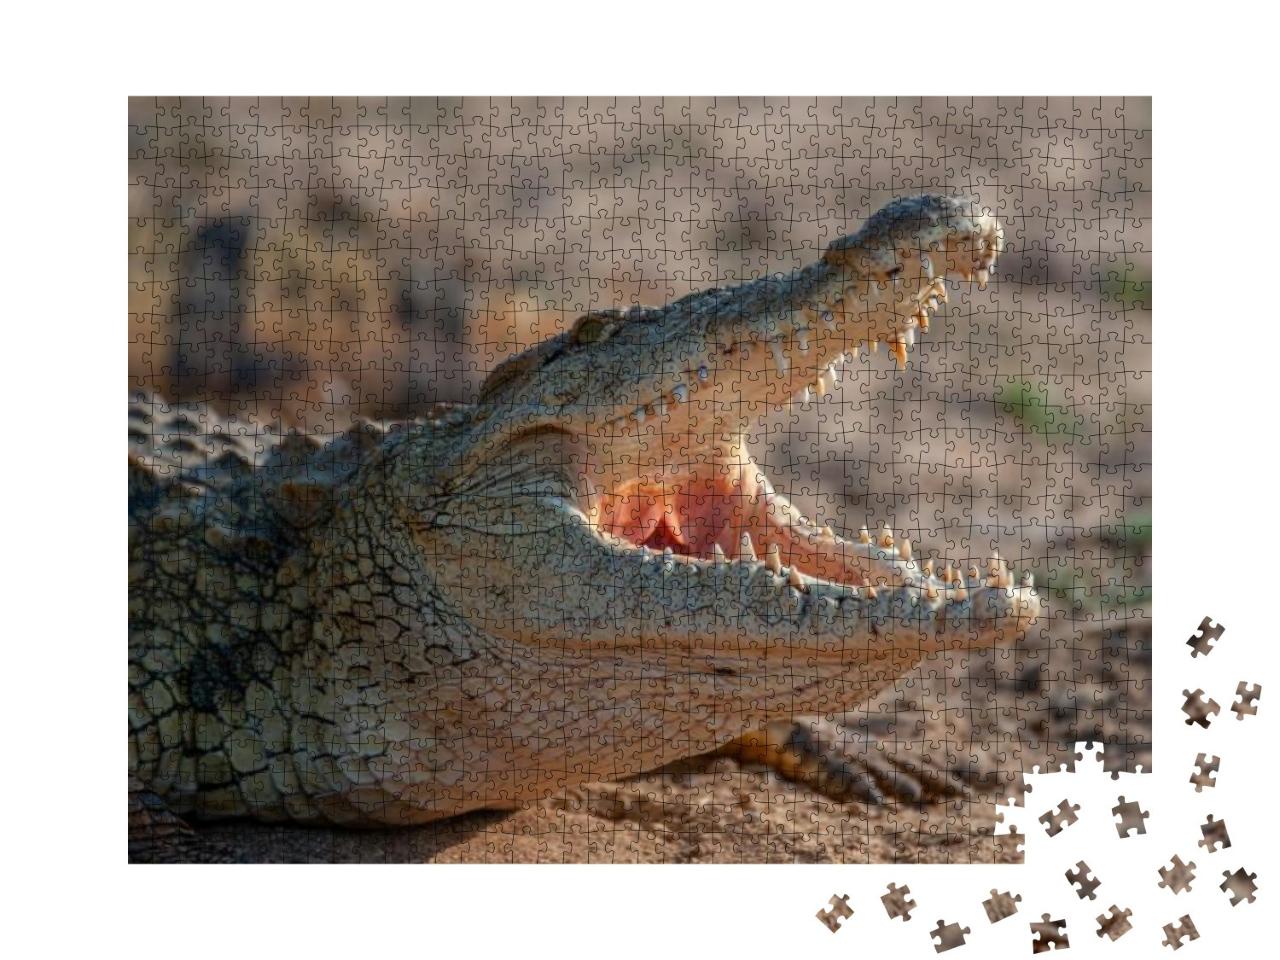 A Nile Crocodile Seen on a Safari in South Africa... Jigsaw Puzzle with 1000 pieces